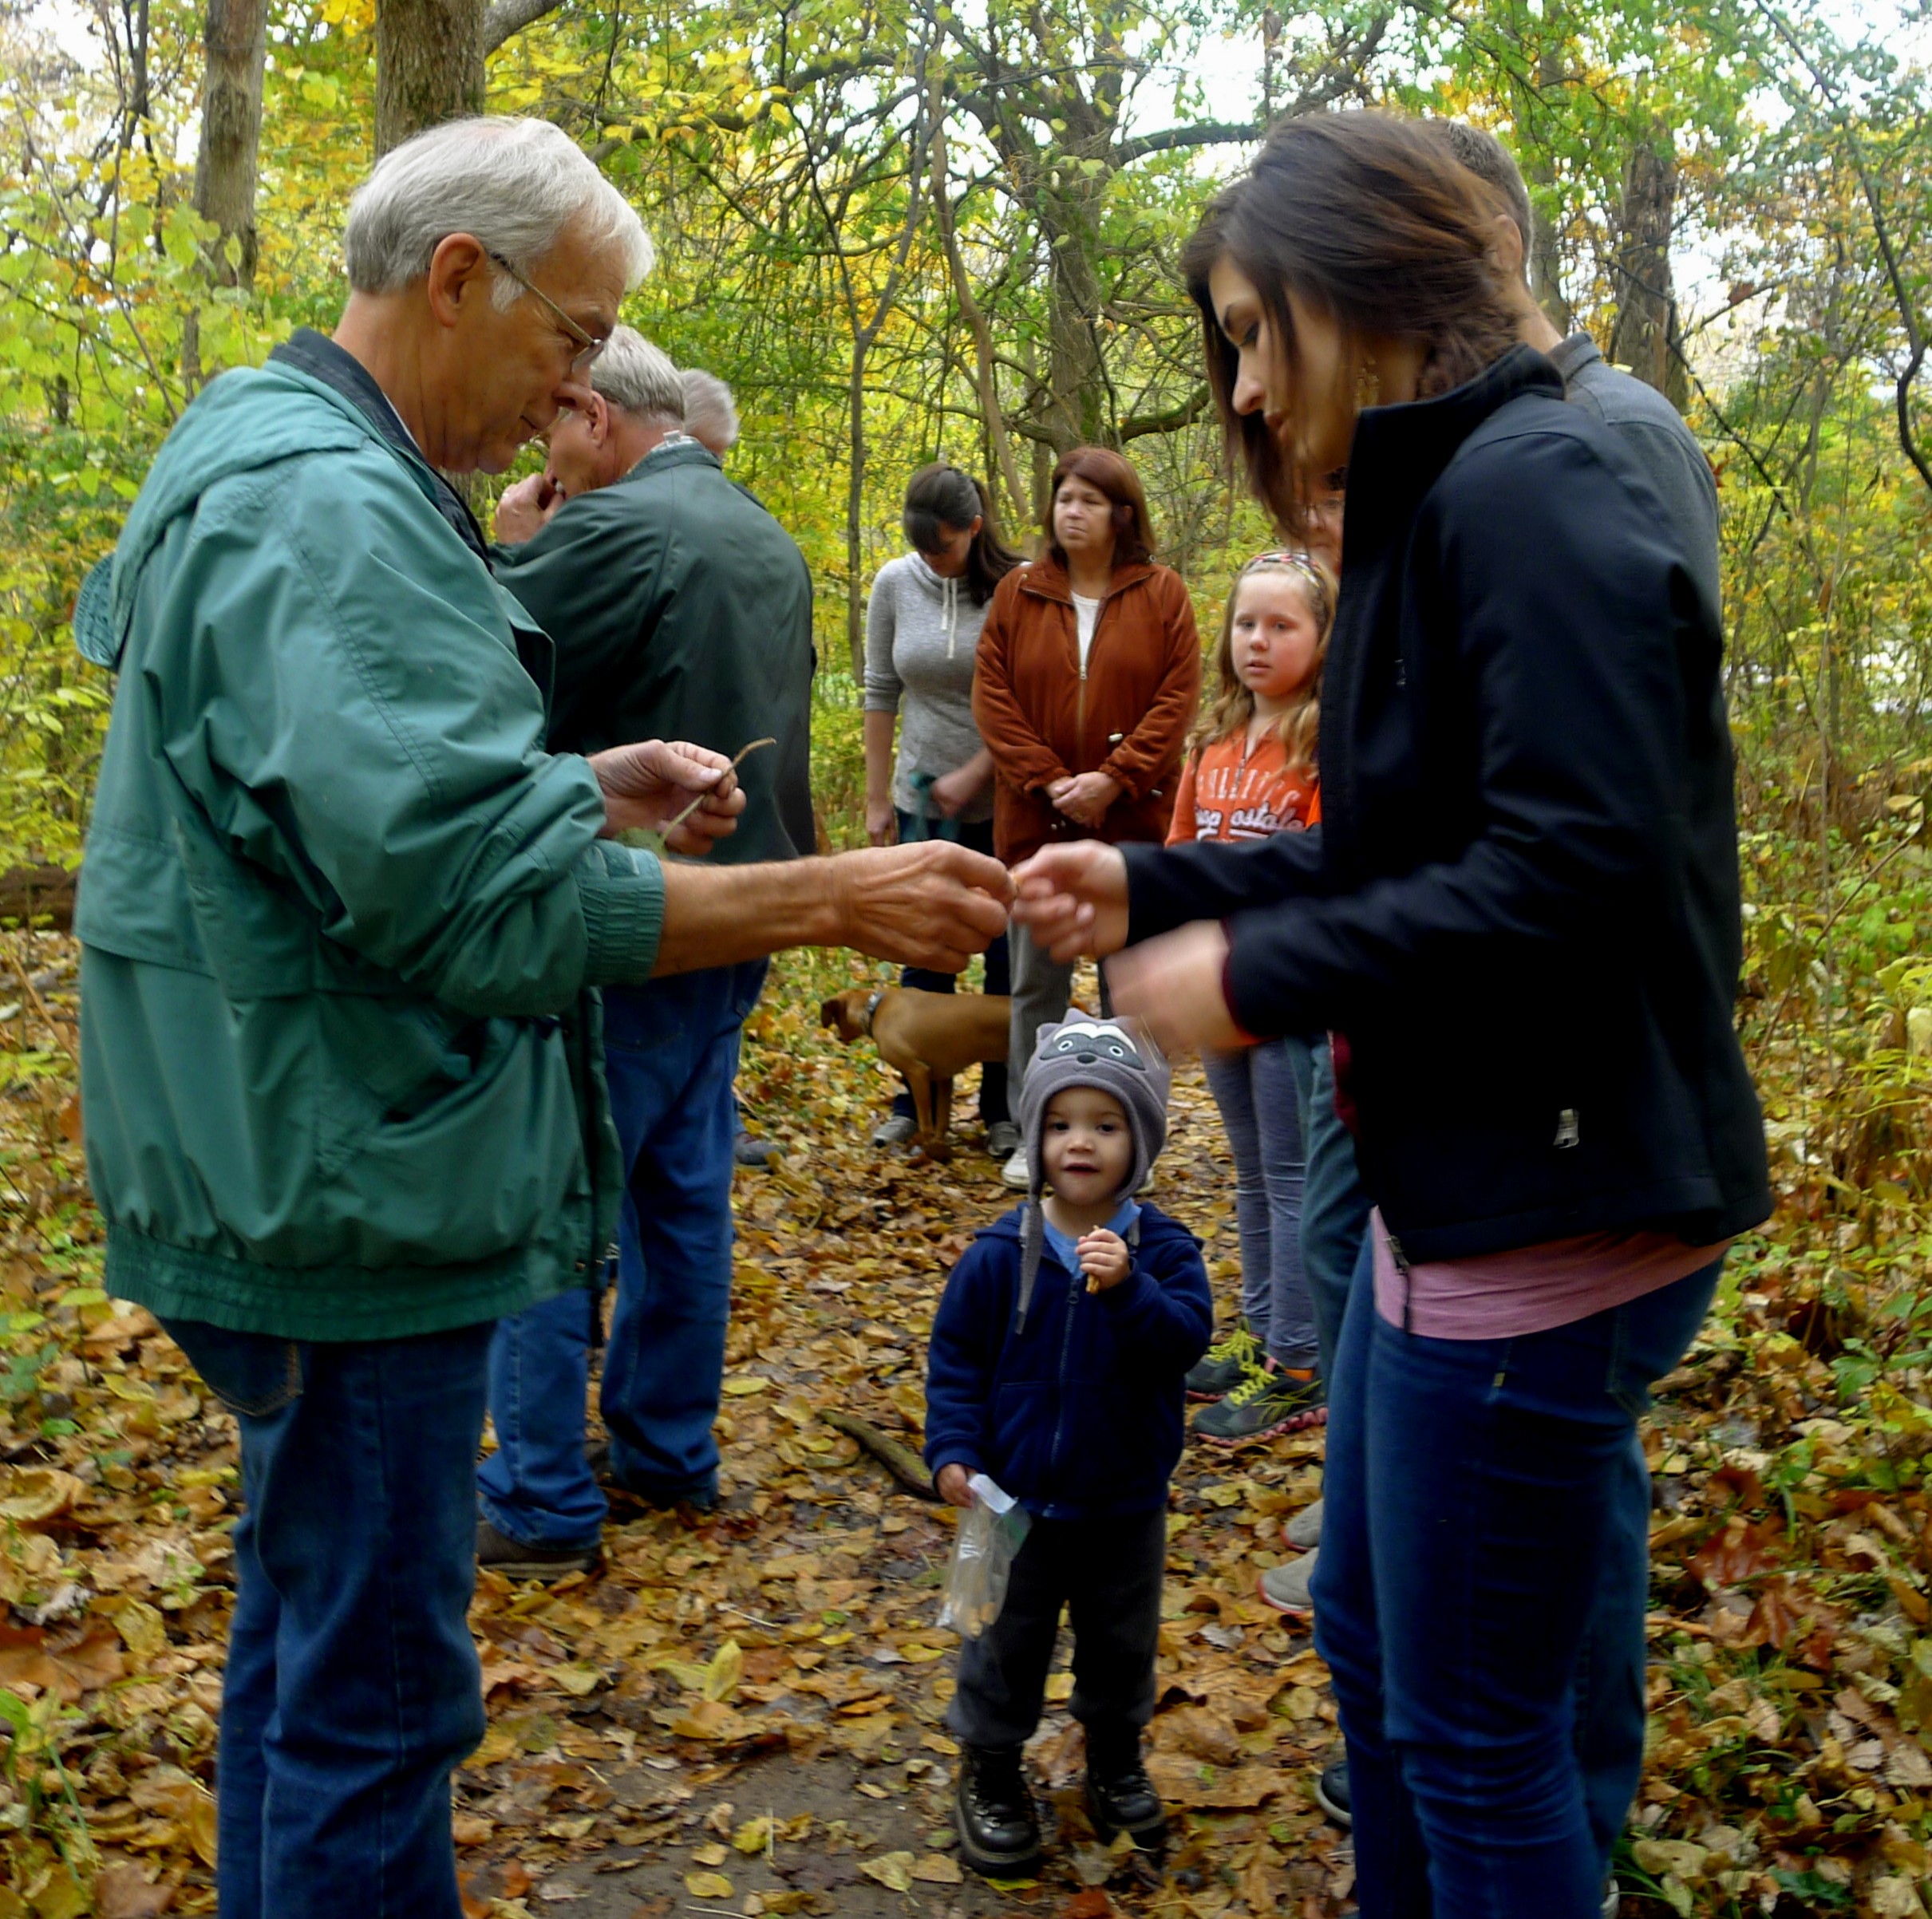 Luke Hunt, a certified naturalist in Indiana, leads the 2015 fall interpretive hike attendees through Heritage Trail in Winona Lake, noting natural features found along the trail.